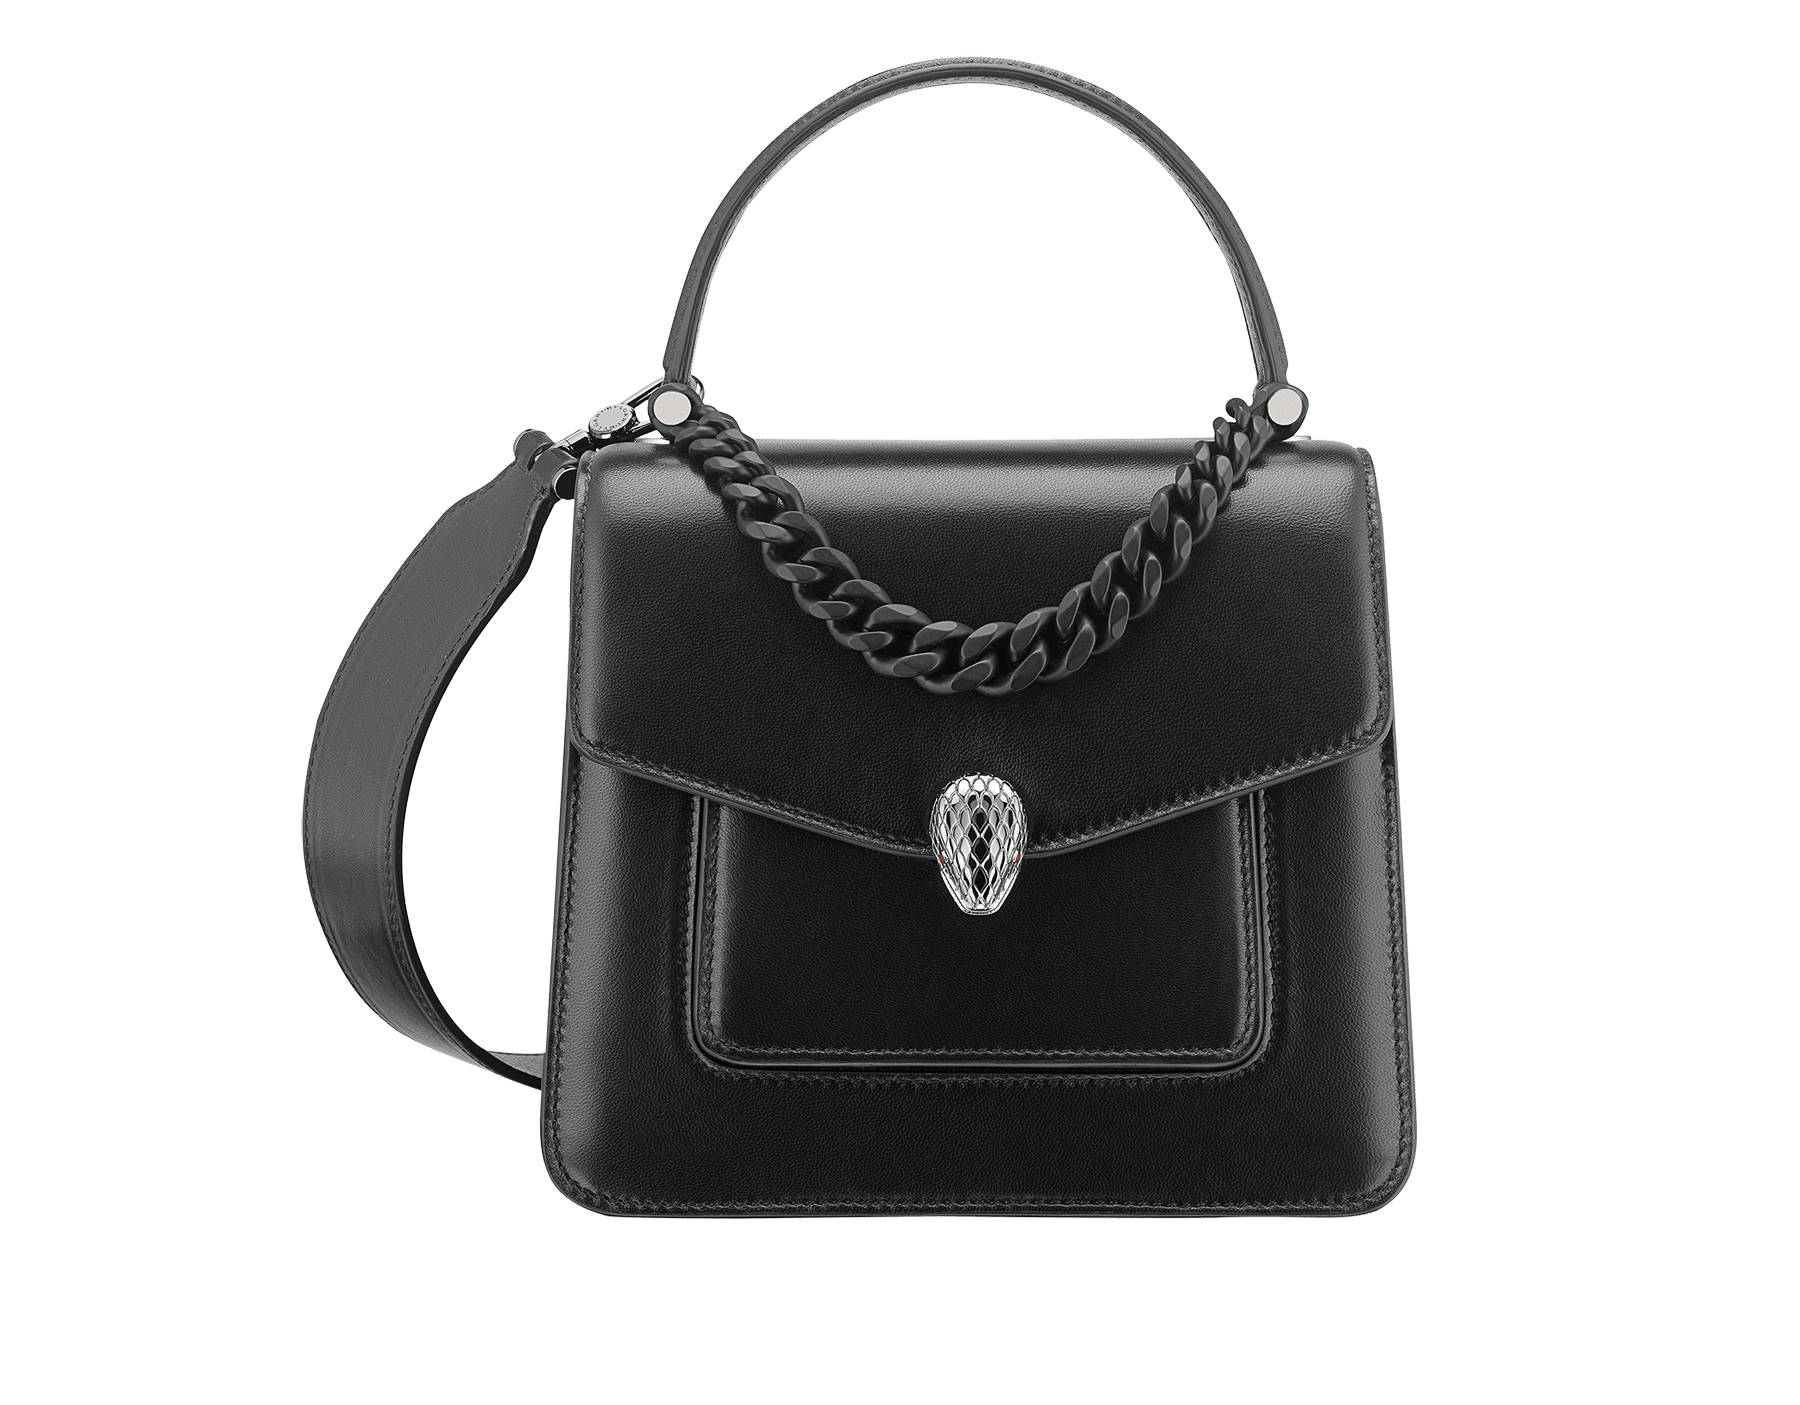 "Serpenti Forever" small maxi chain top-handle bag in black nappa leather, with black nappa leather inner lining. New Serpenti head closure in dark ruthenium-plated brass and finished with small black onyx scales in the middle and red enamel eyes. 1133-MCNa image 1